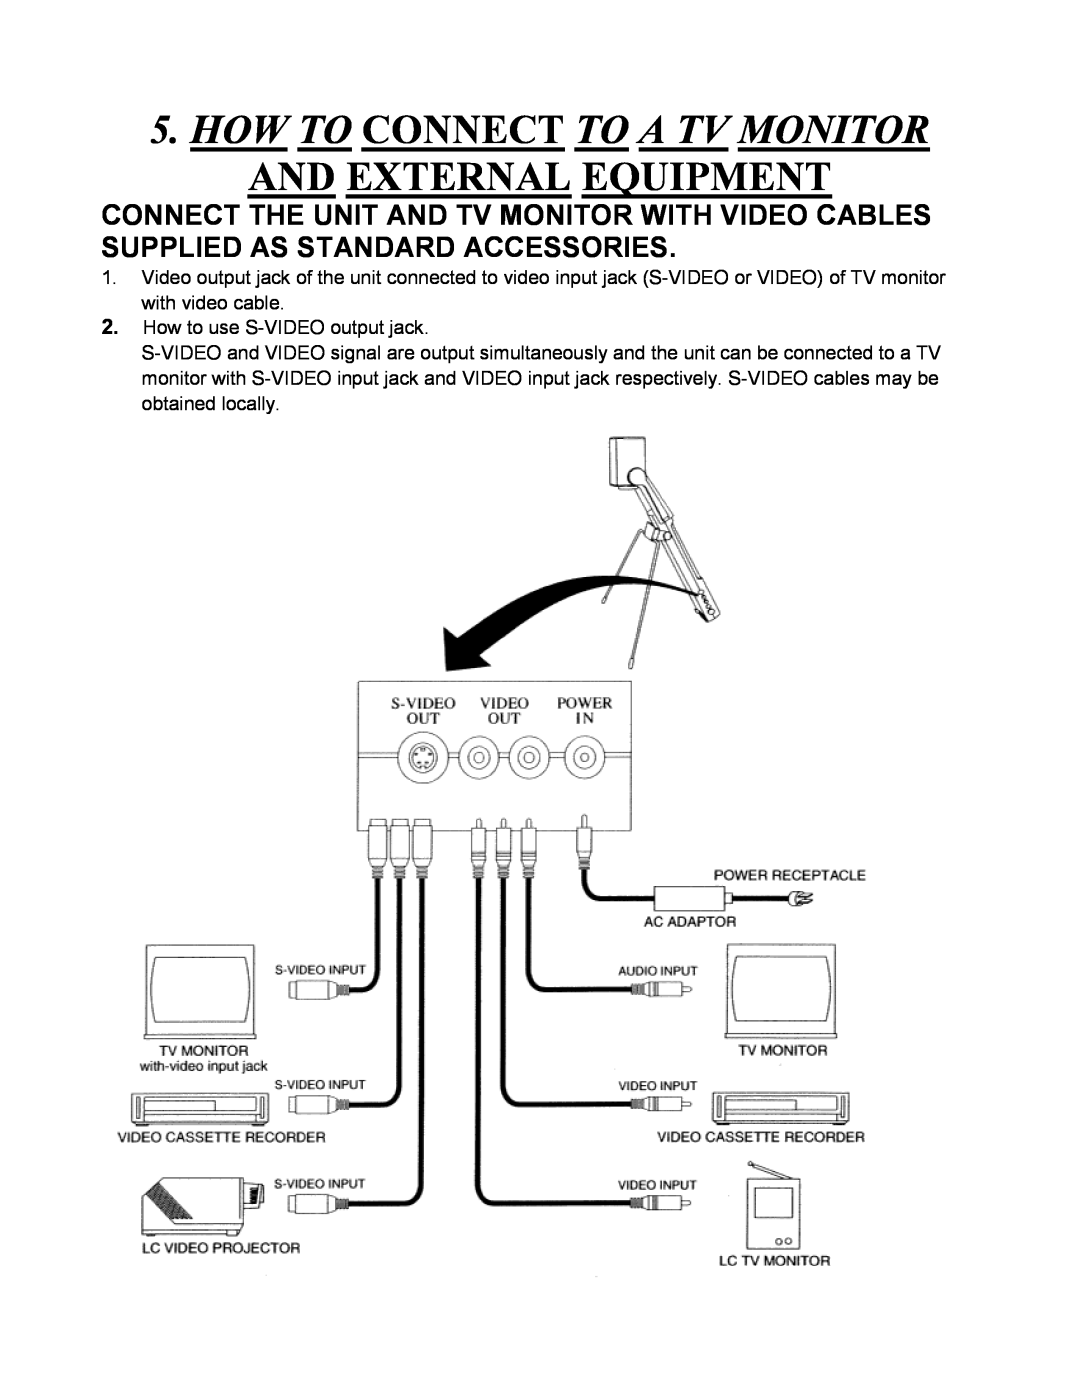 Eiki V-2500 instruction manual How To Connect To A Tv Monitor, And External Equipment 